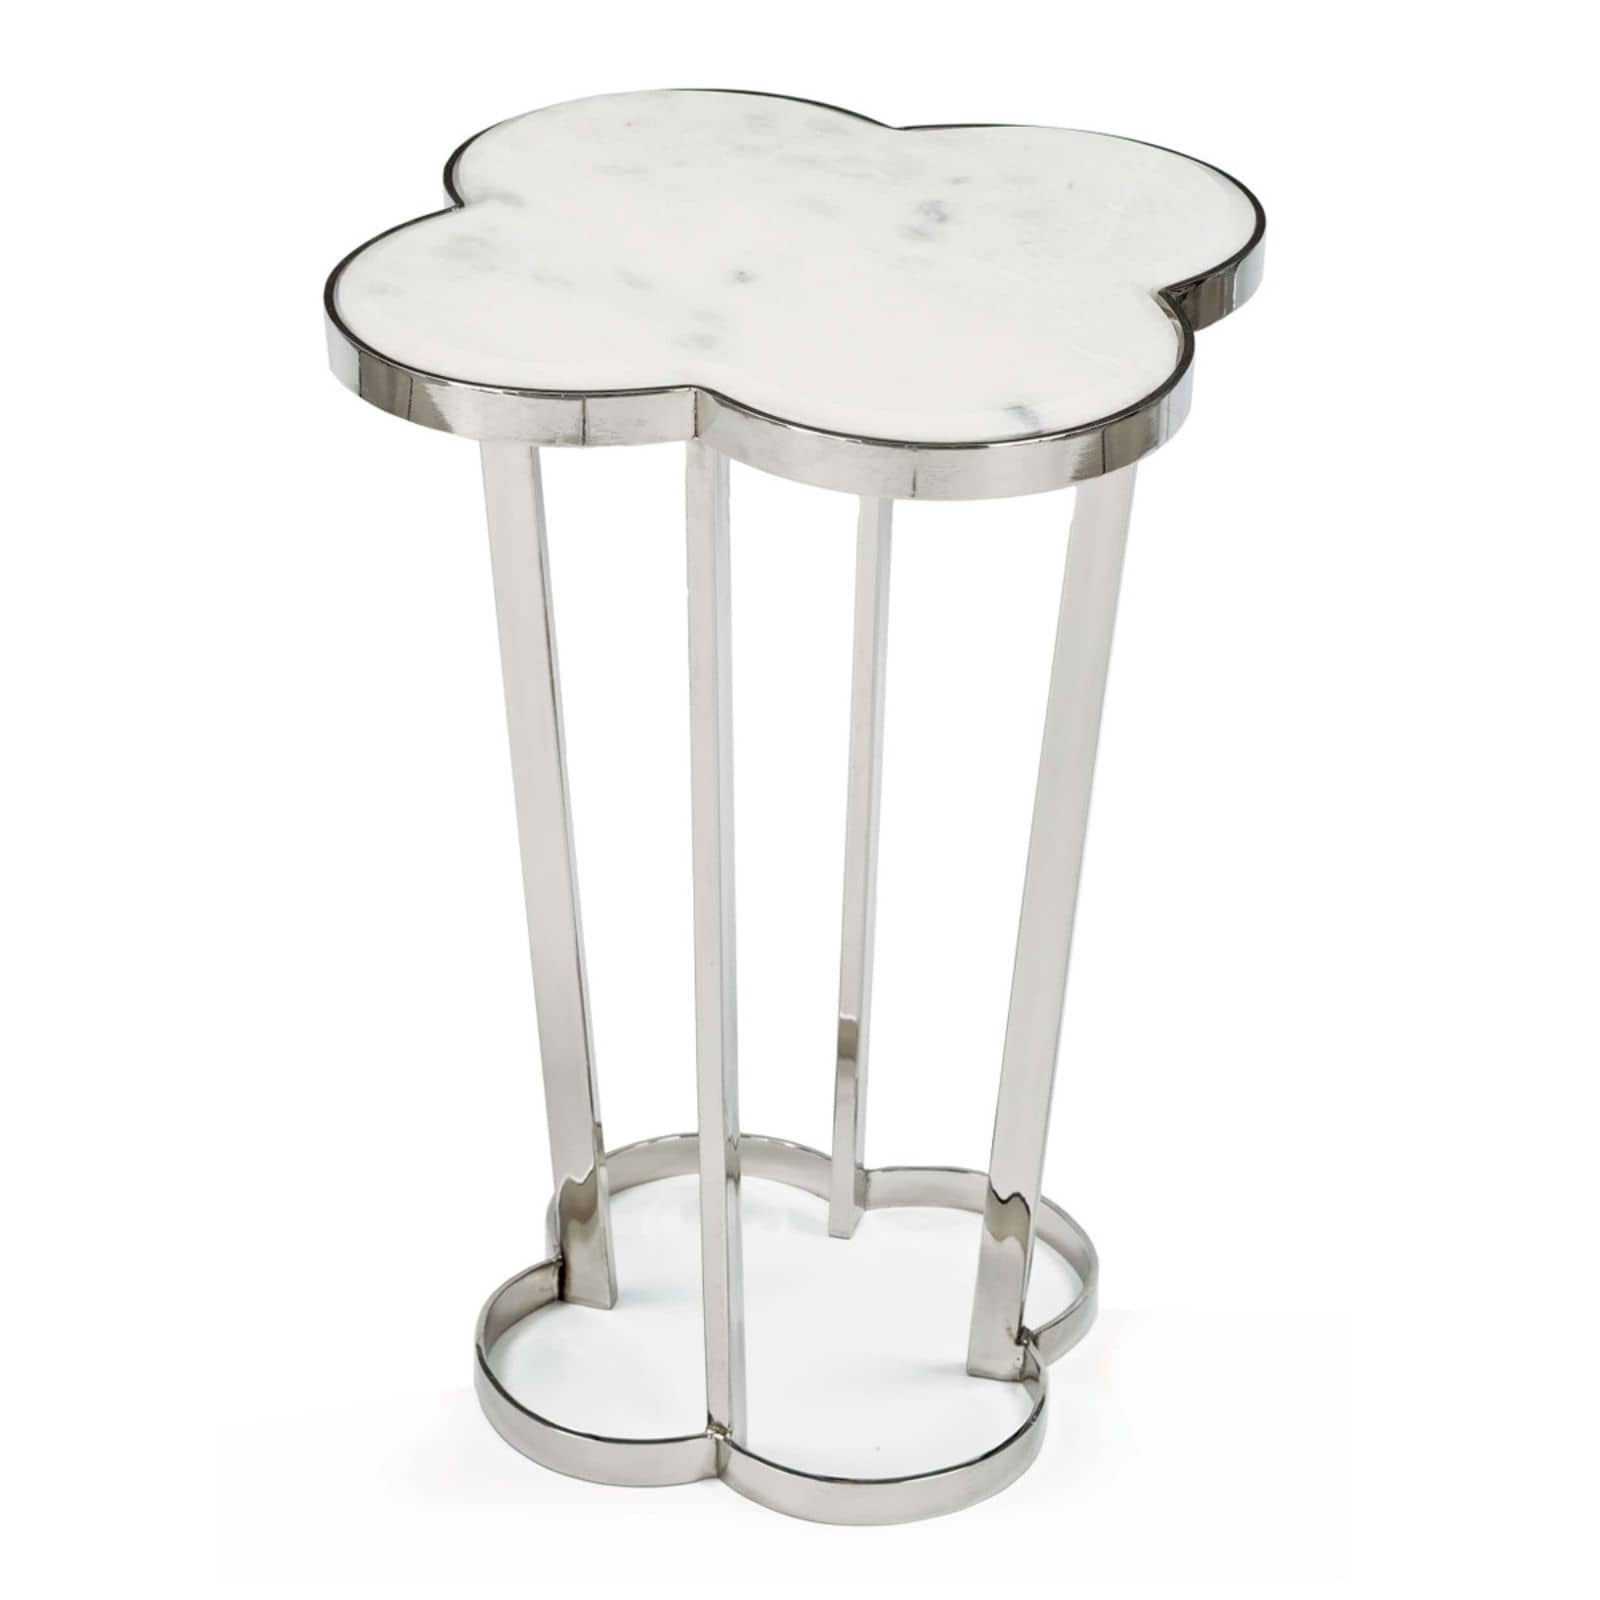 Regina Andrew Clover Table in Polished Nickel